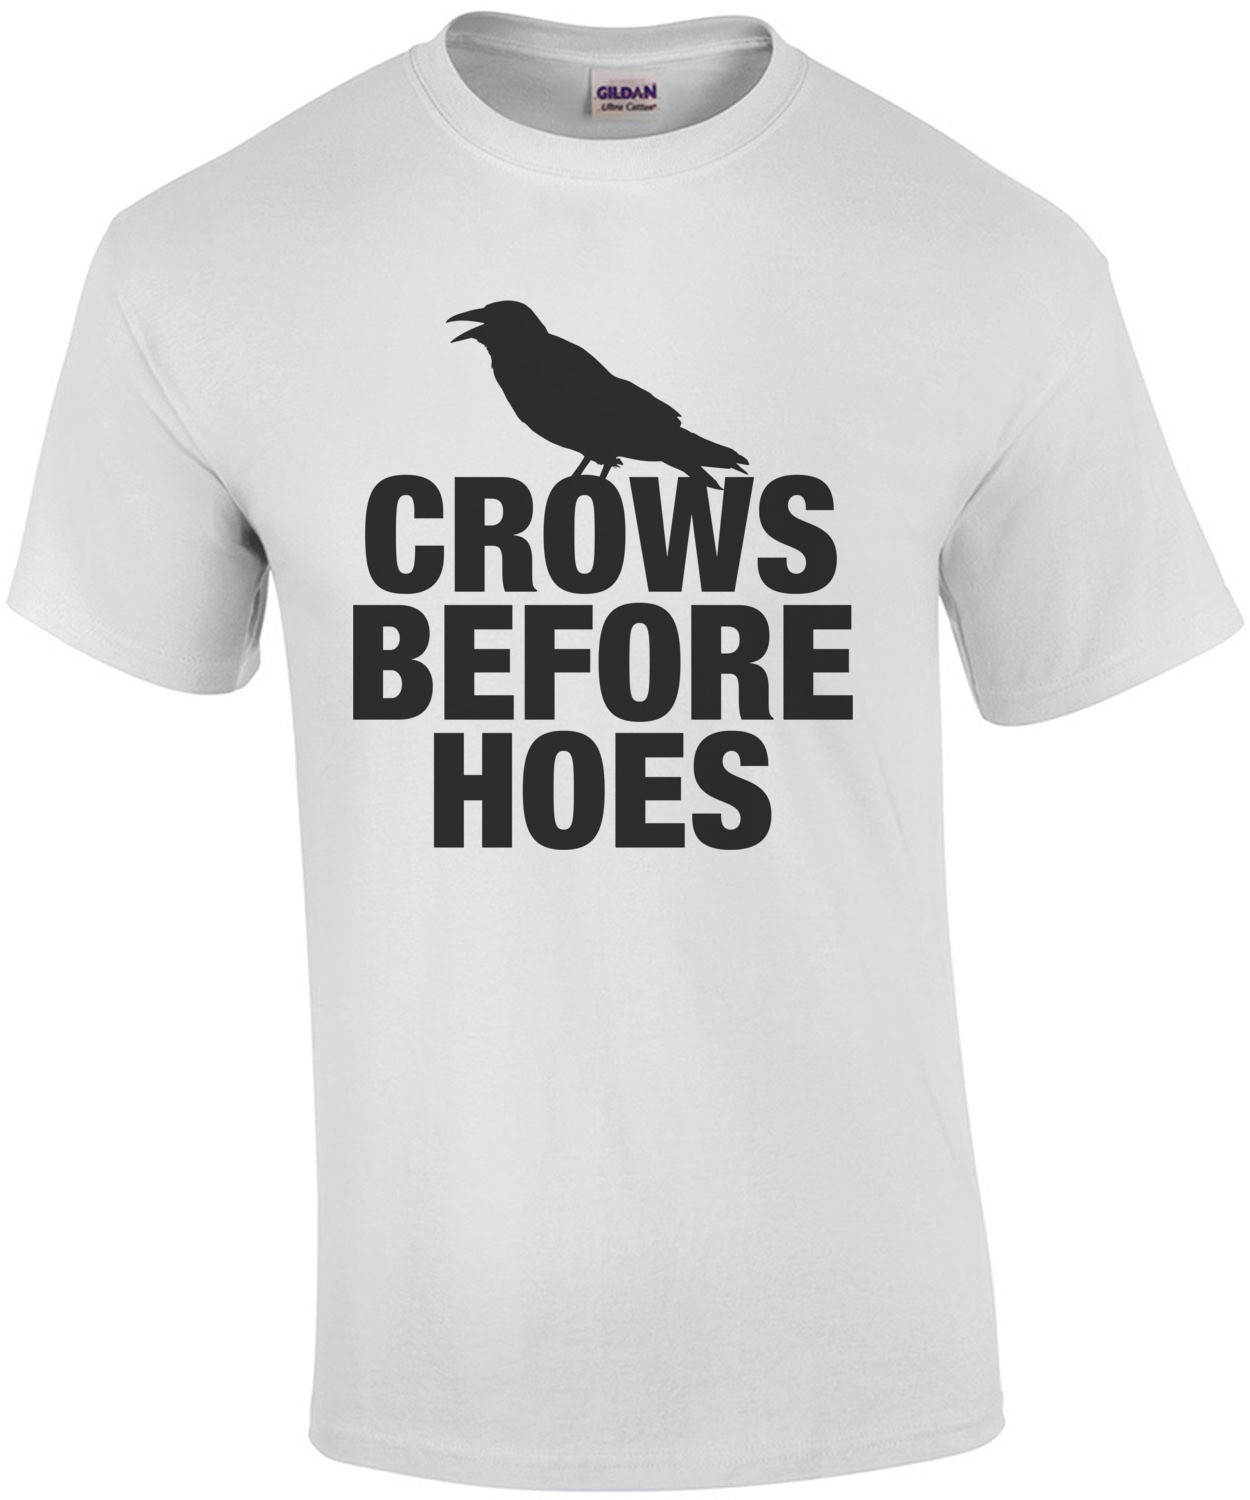 Crows Before Hoes Game of Thrones